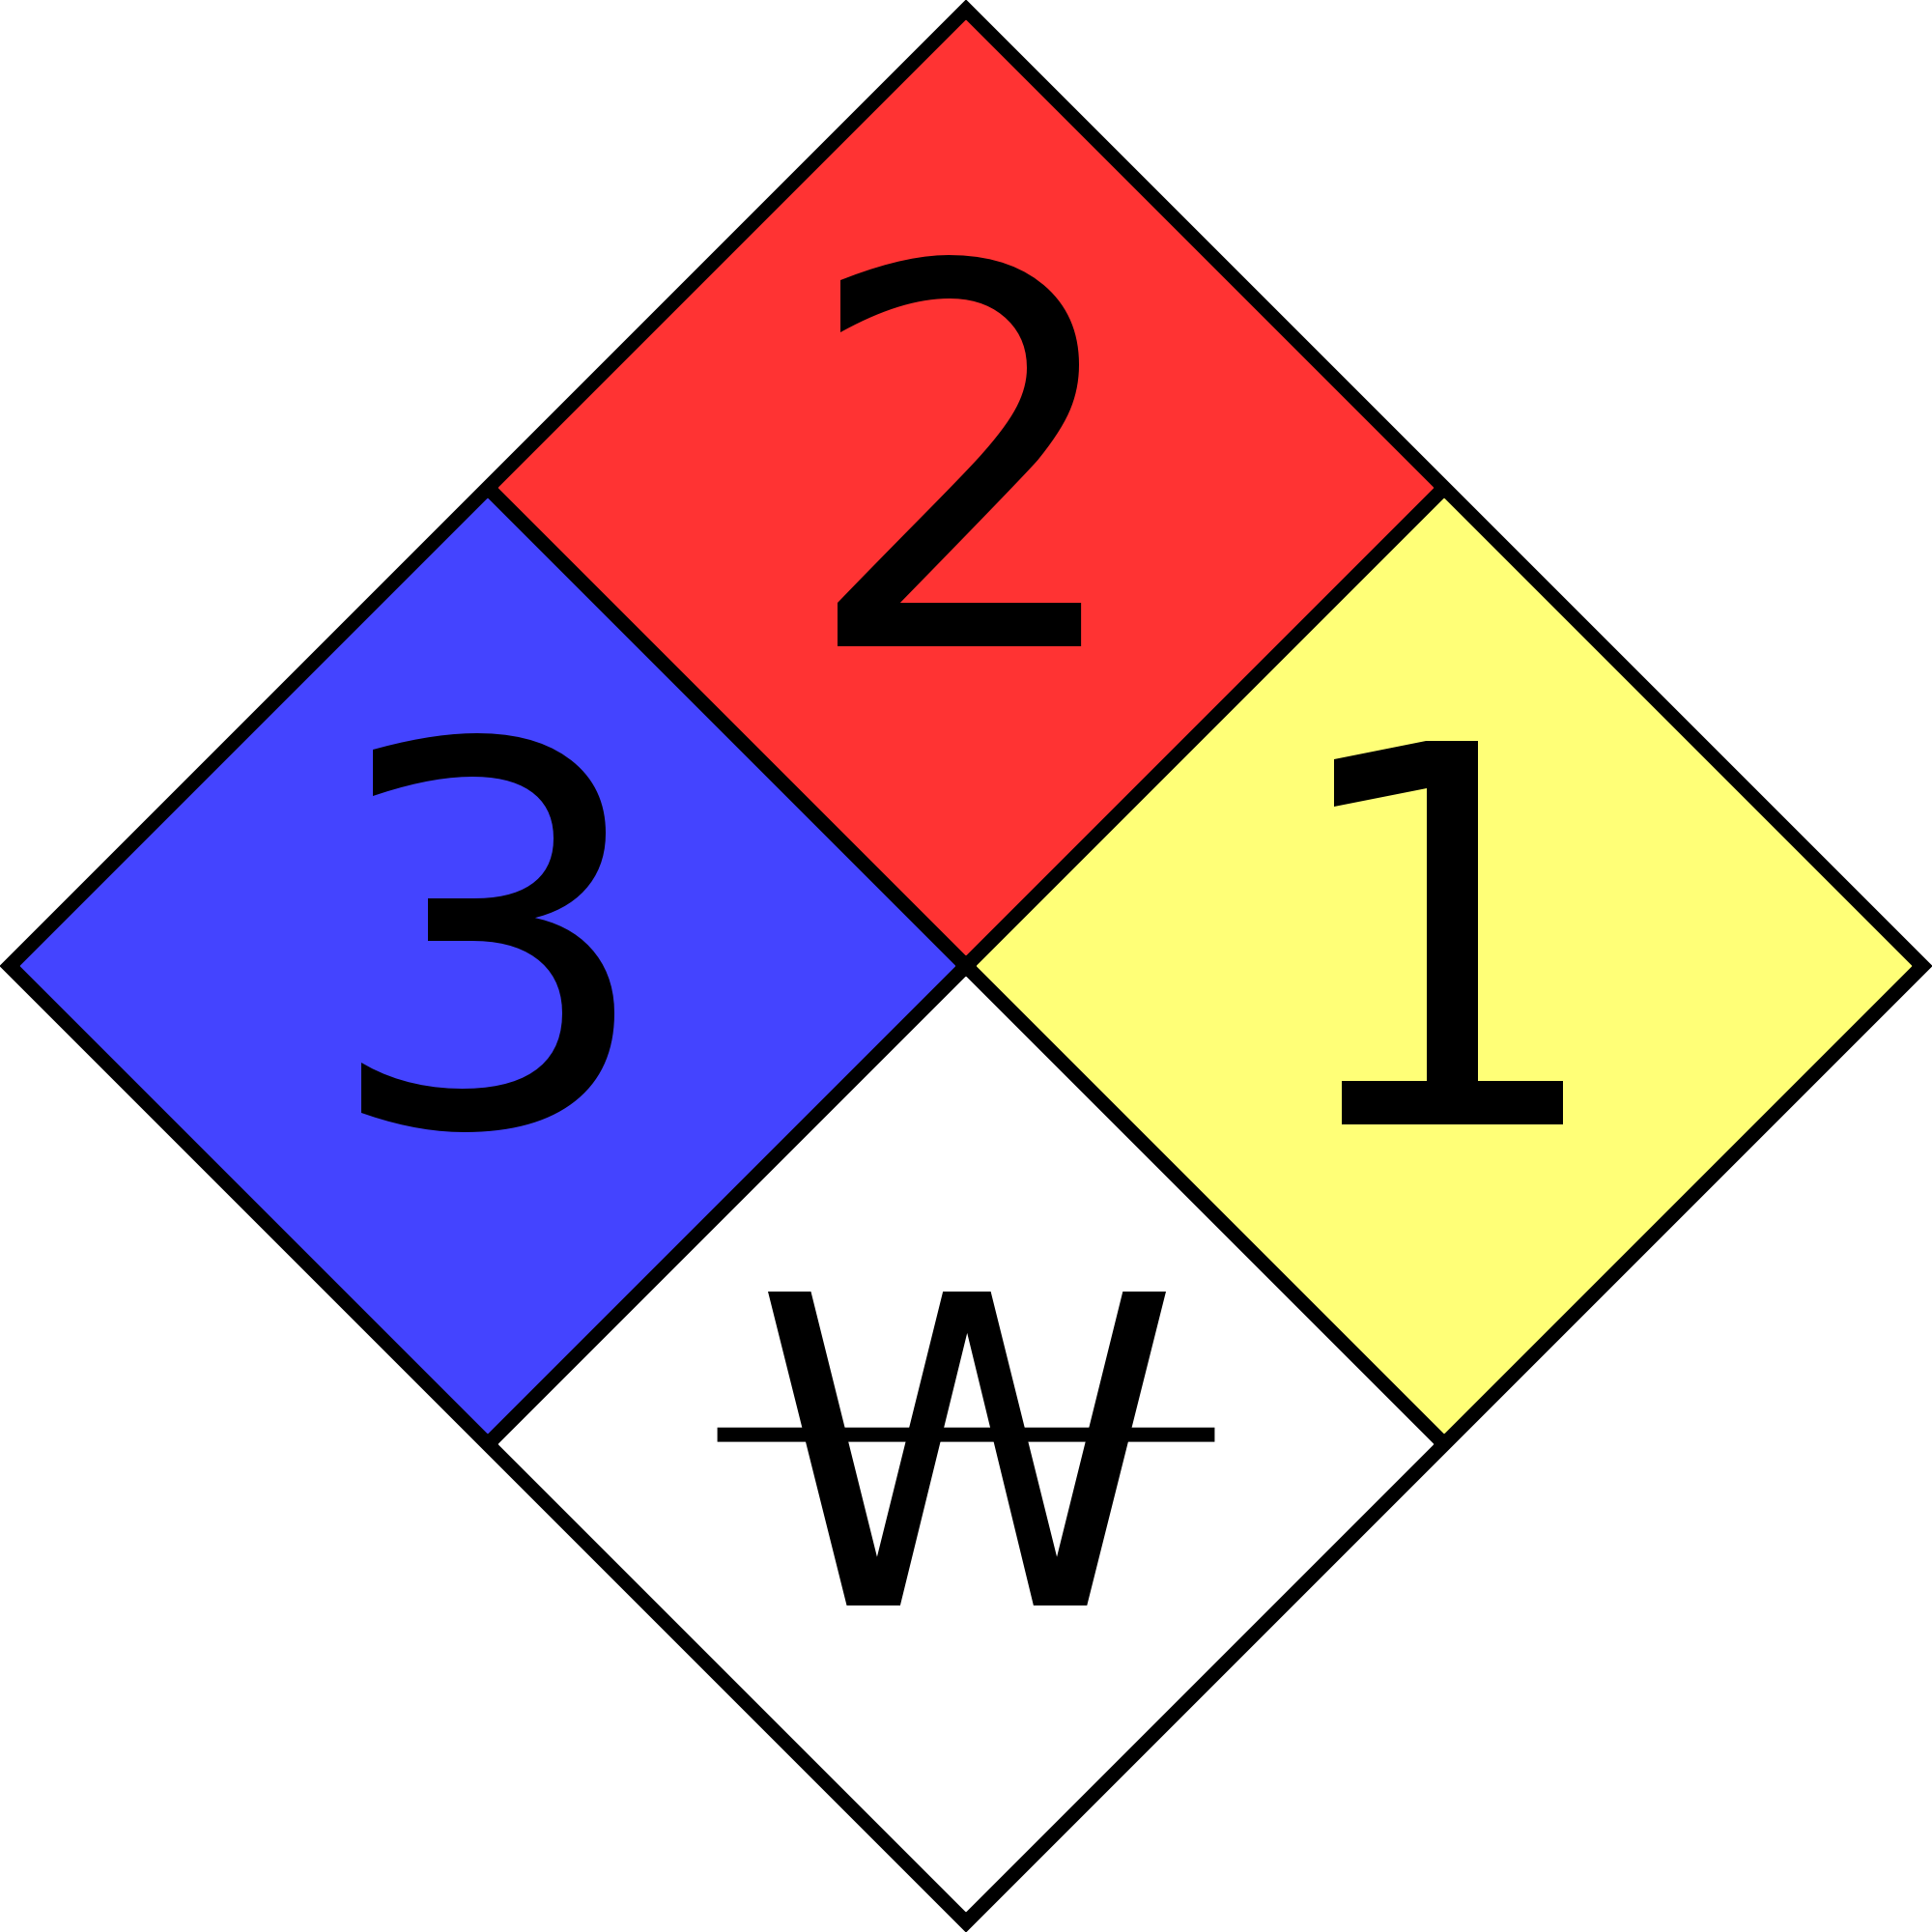 Nfpa 704 Chemical Marking And Fire Diamond